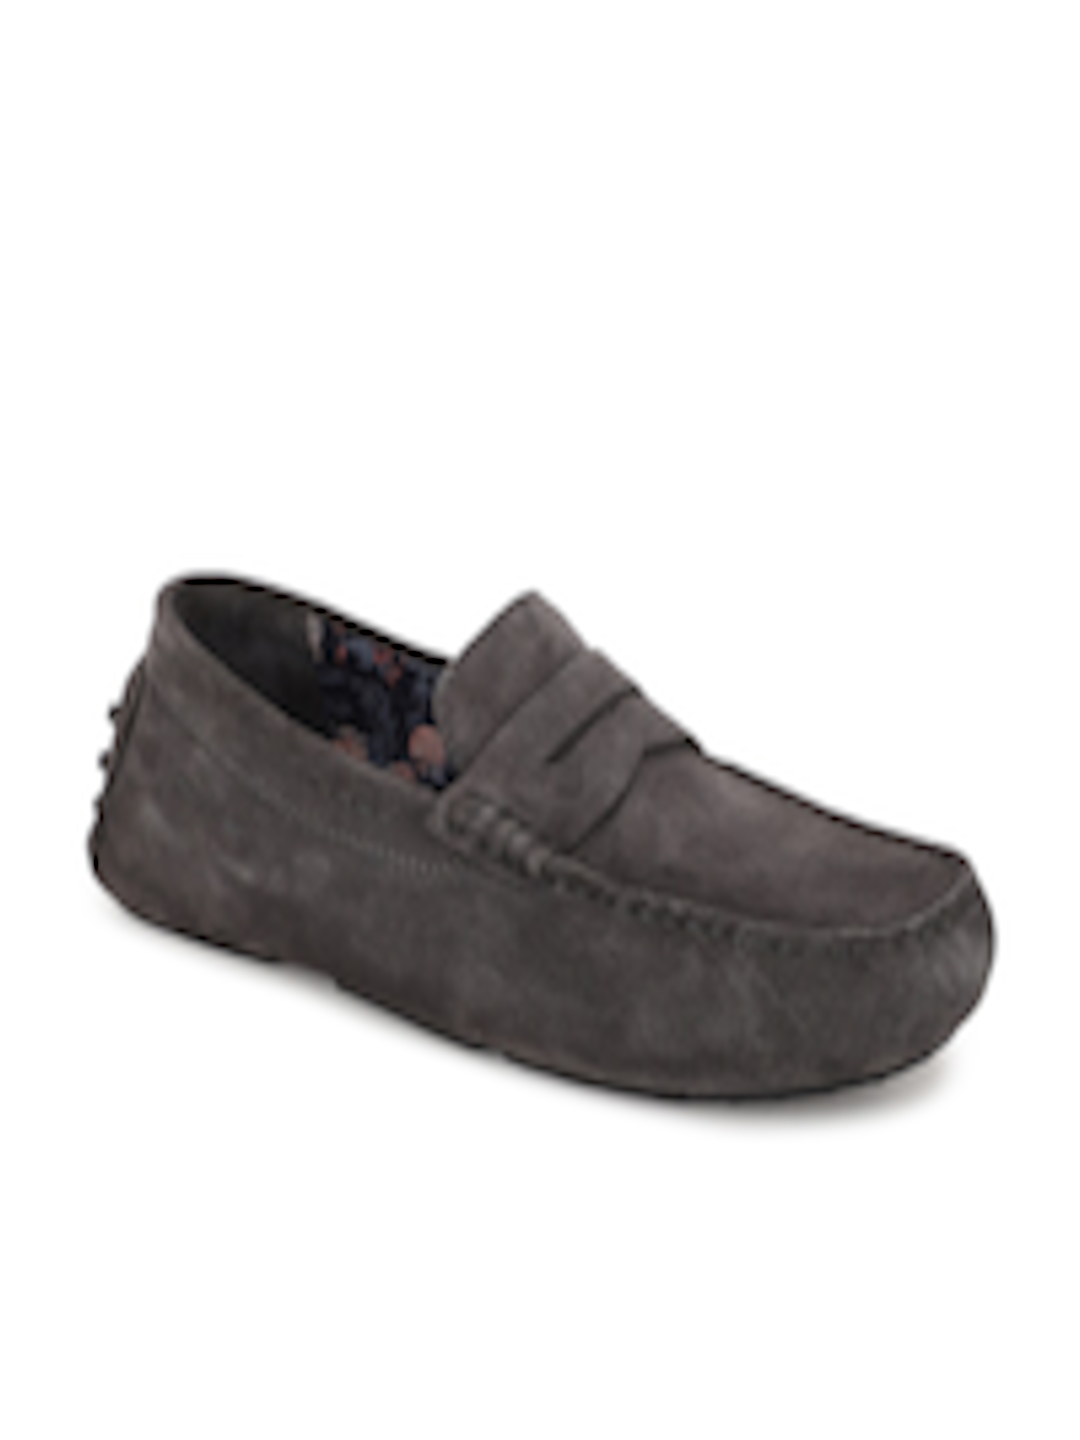 Buy Hush Puppies Men Grey Suede Loafers - Casual Shoes for Men 18250824 ...